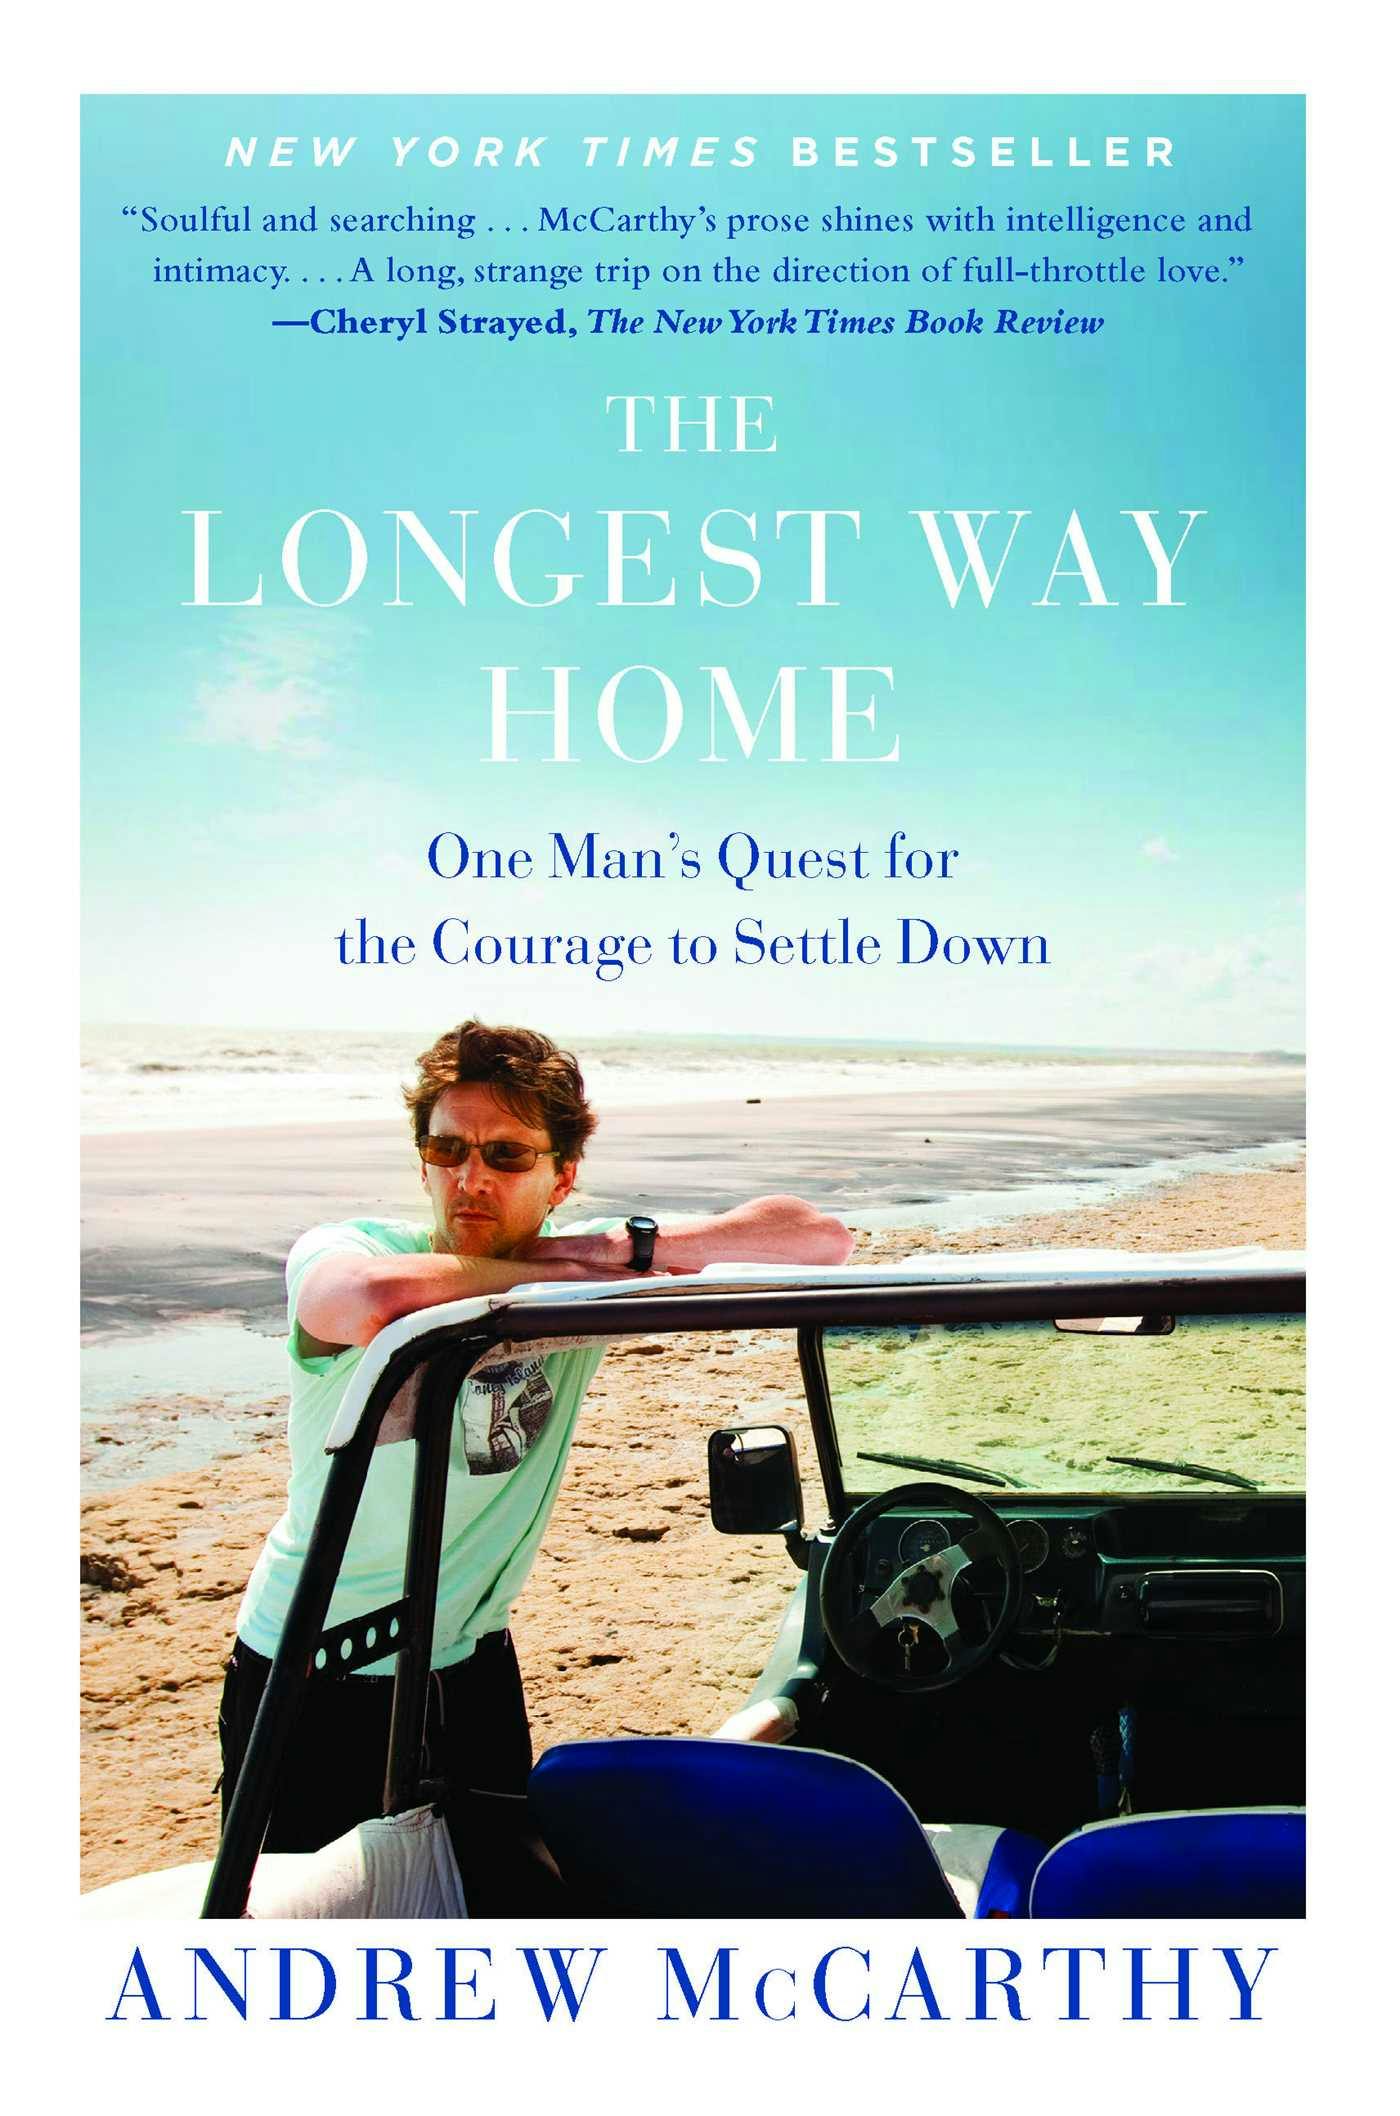 The Longest Way Home: One Man's Quest for the Courage to Settle Down - Andrew McCarthy